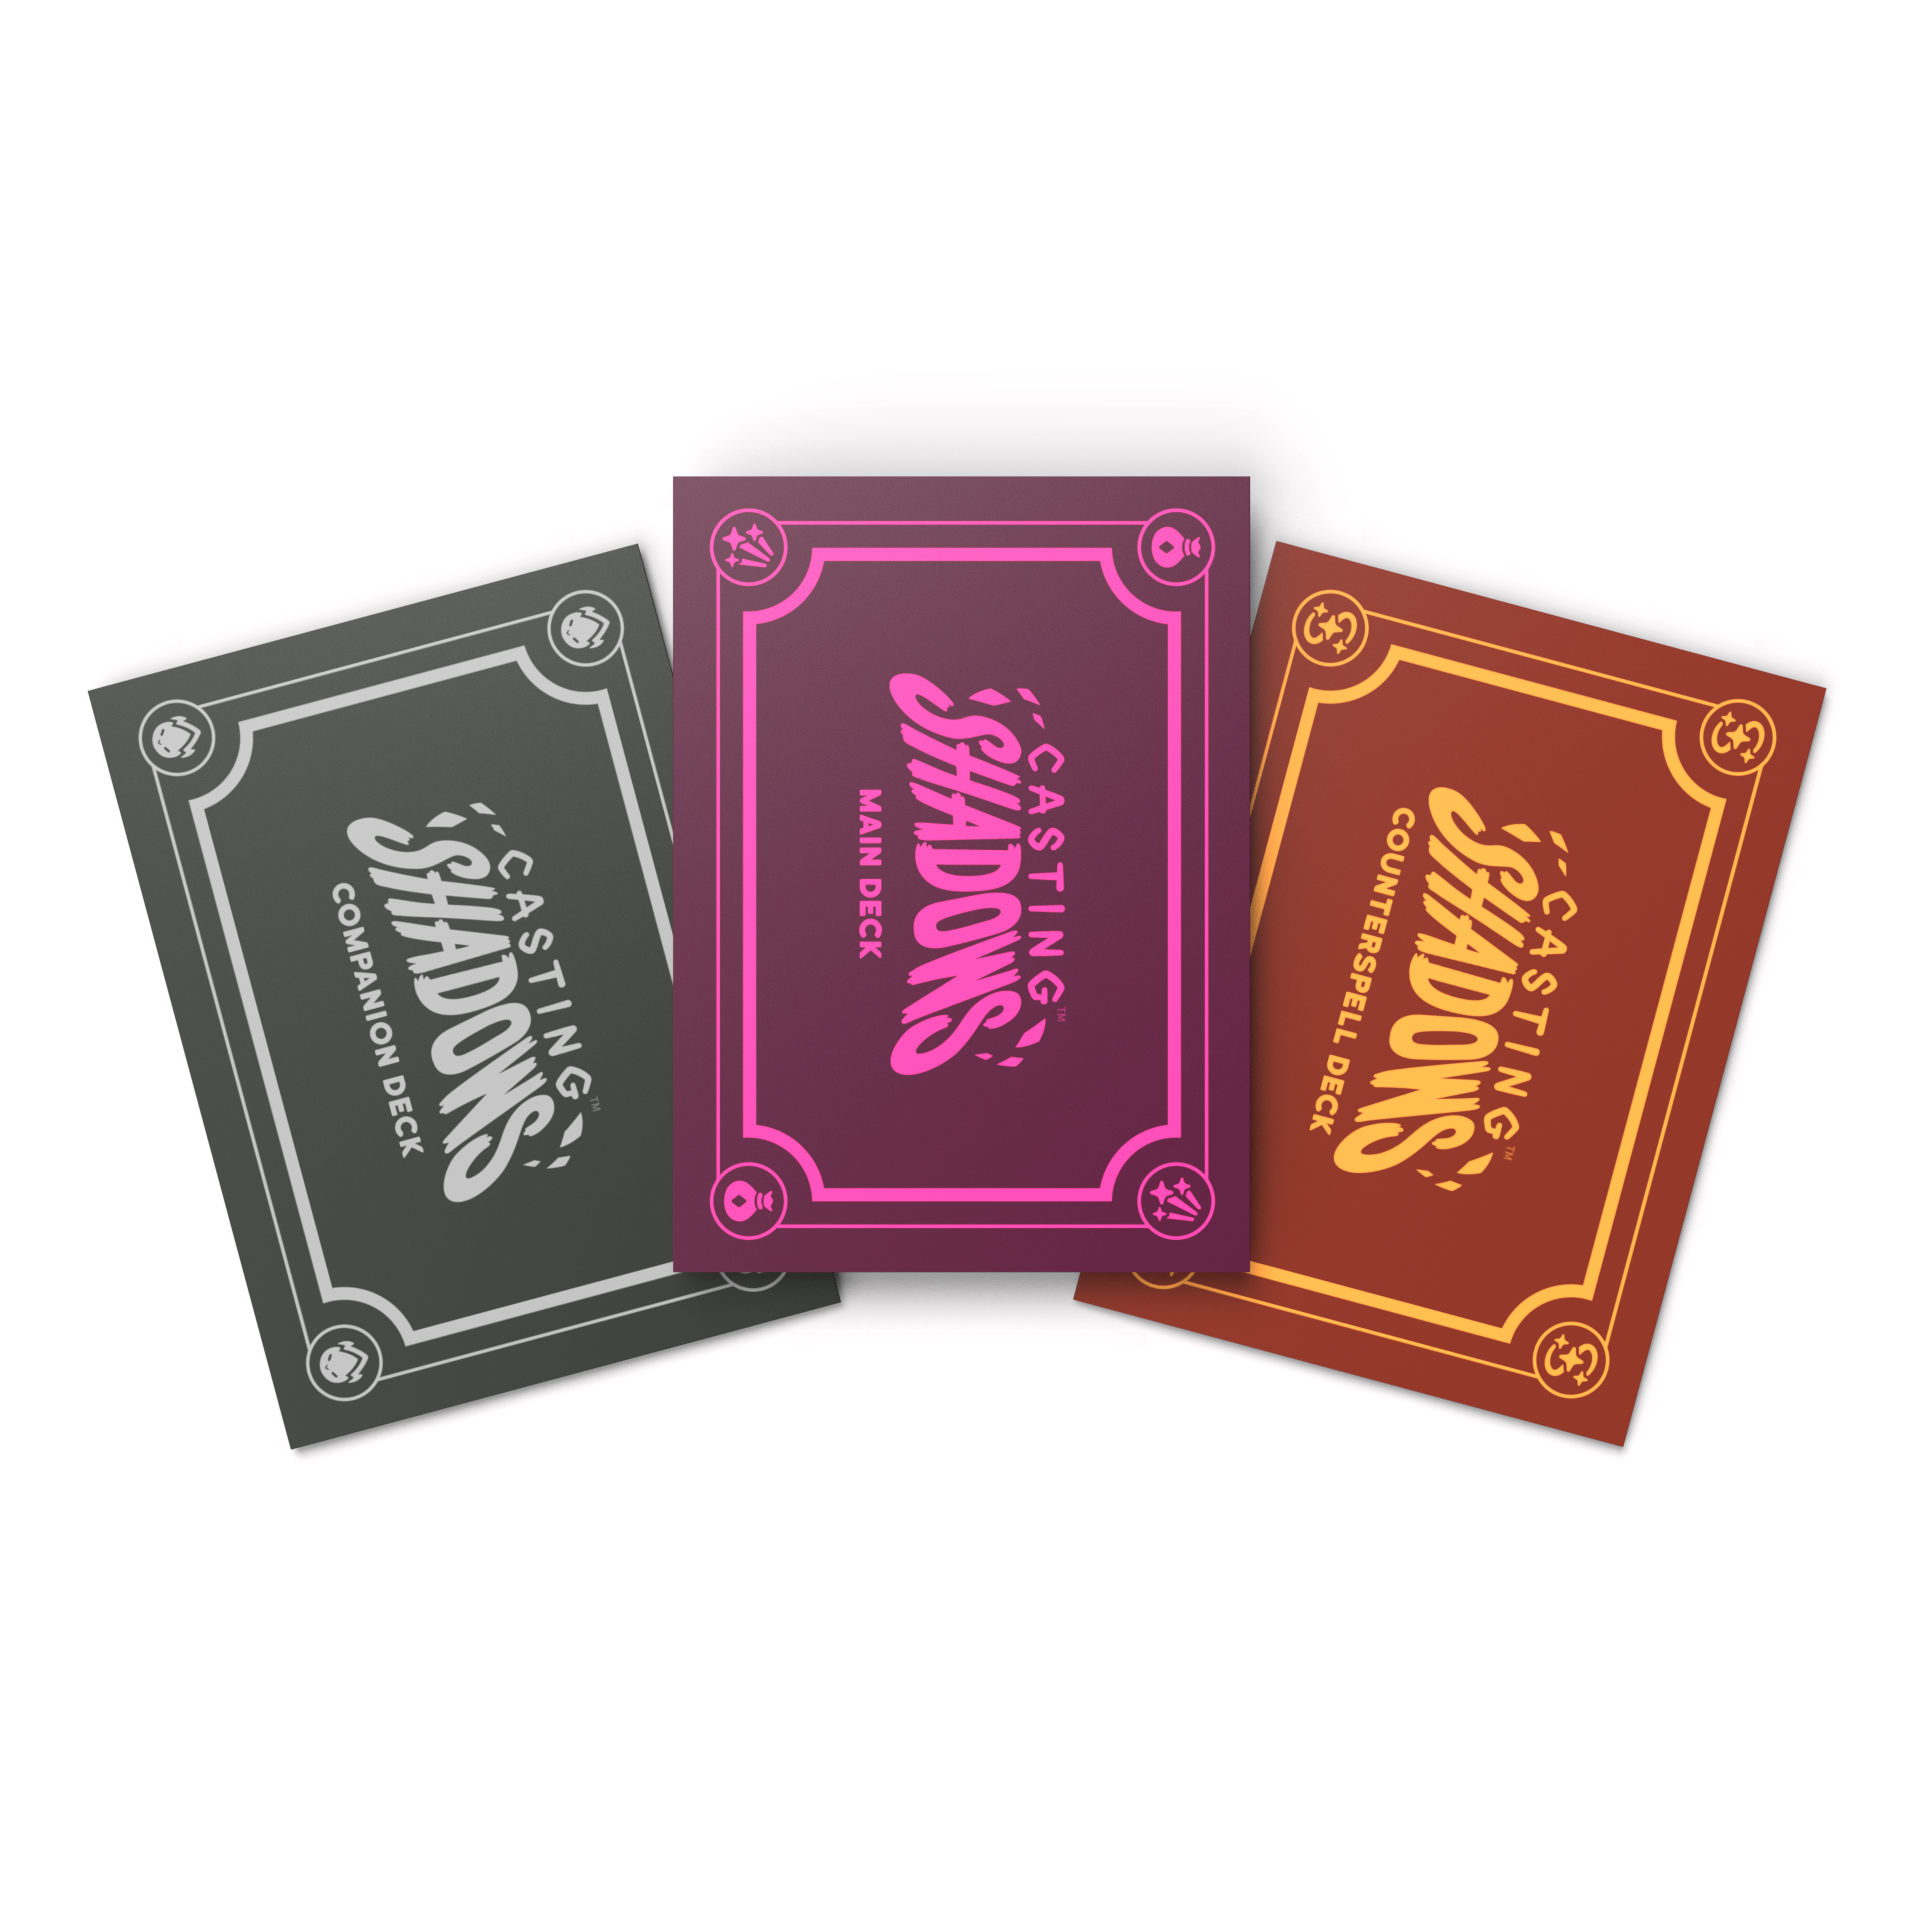 Three card decks in gray, purple, and orange with "Casting Shadows: Card Sleeves" text on them, displayed overlapping on a white background.